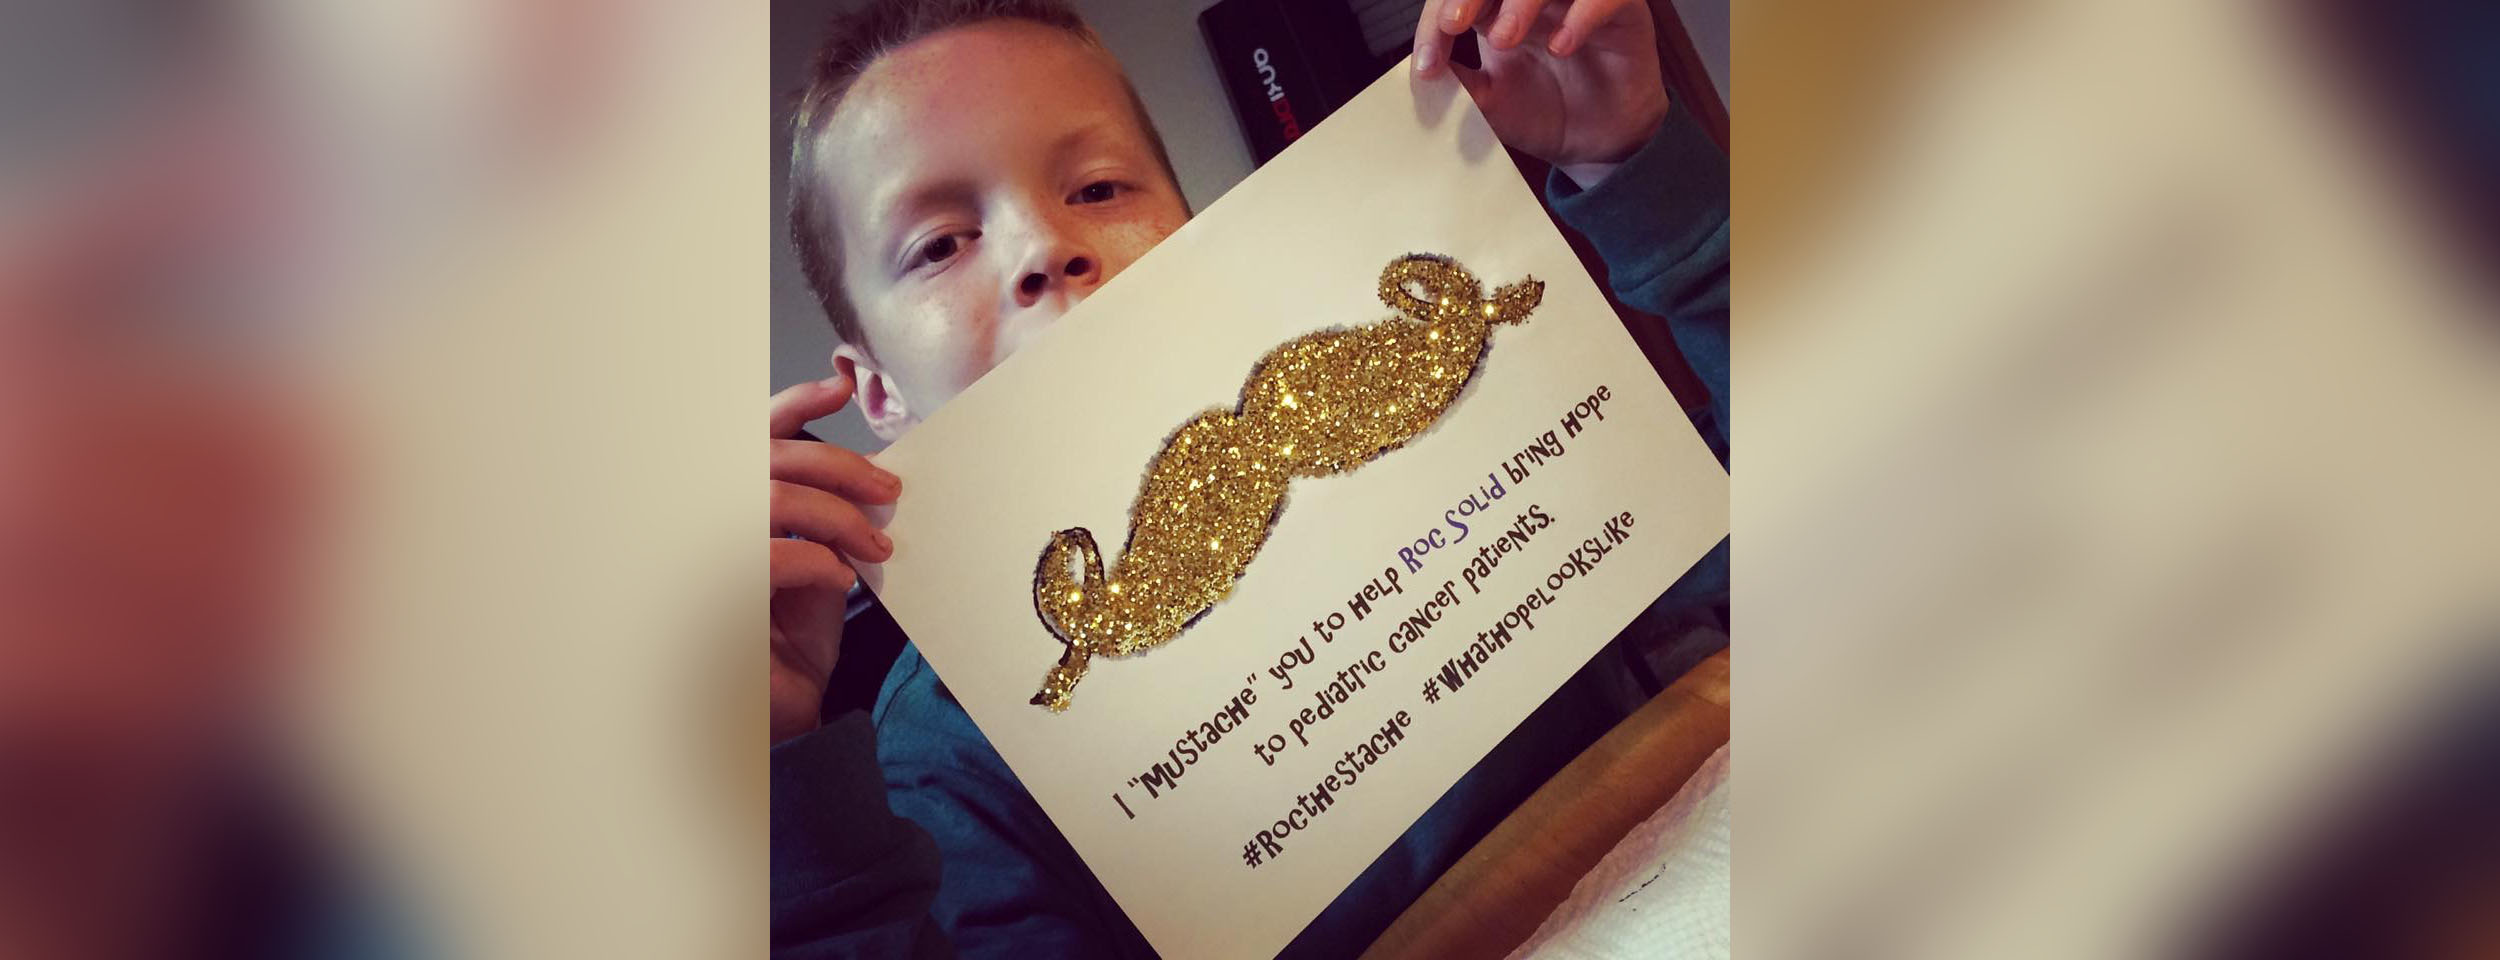 PHOTO: Andrew Jebson, from Chesapeake, Va., is currently fighting Leukemia. He entered his mustache design to the #RocTheStache contest.